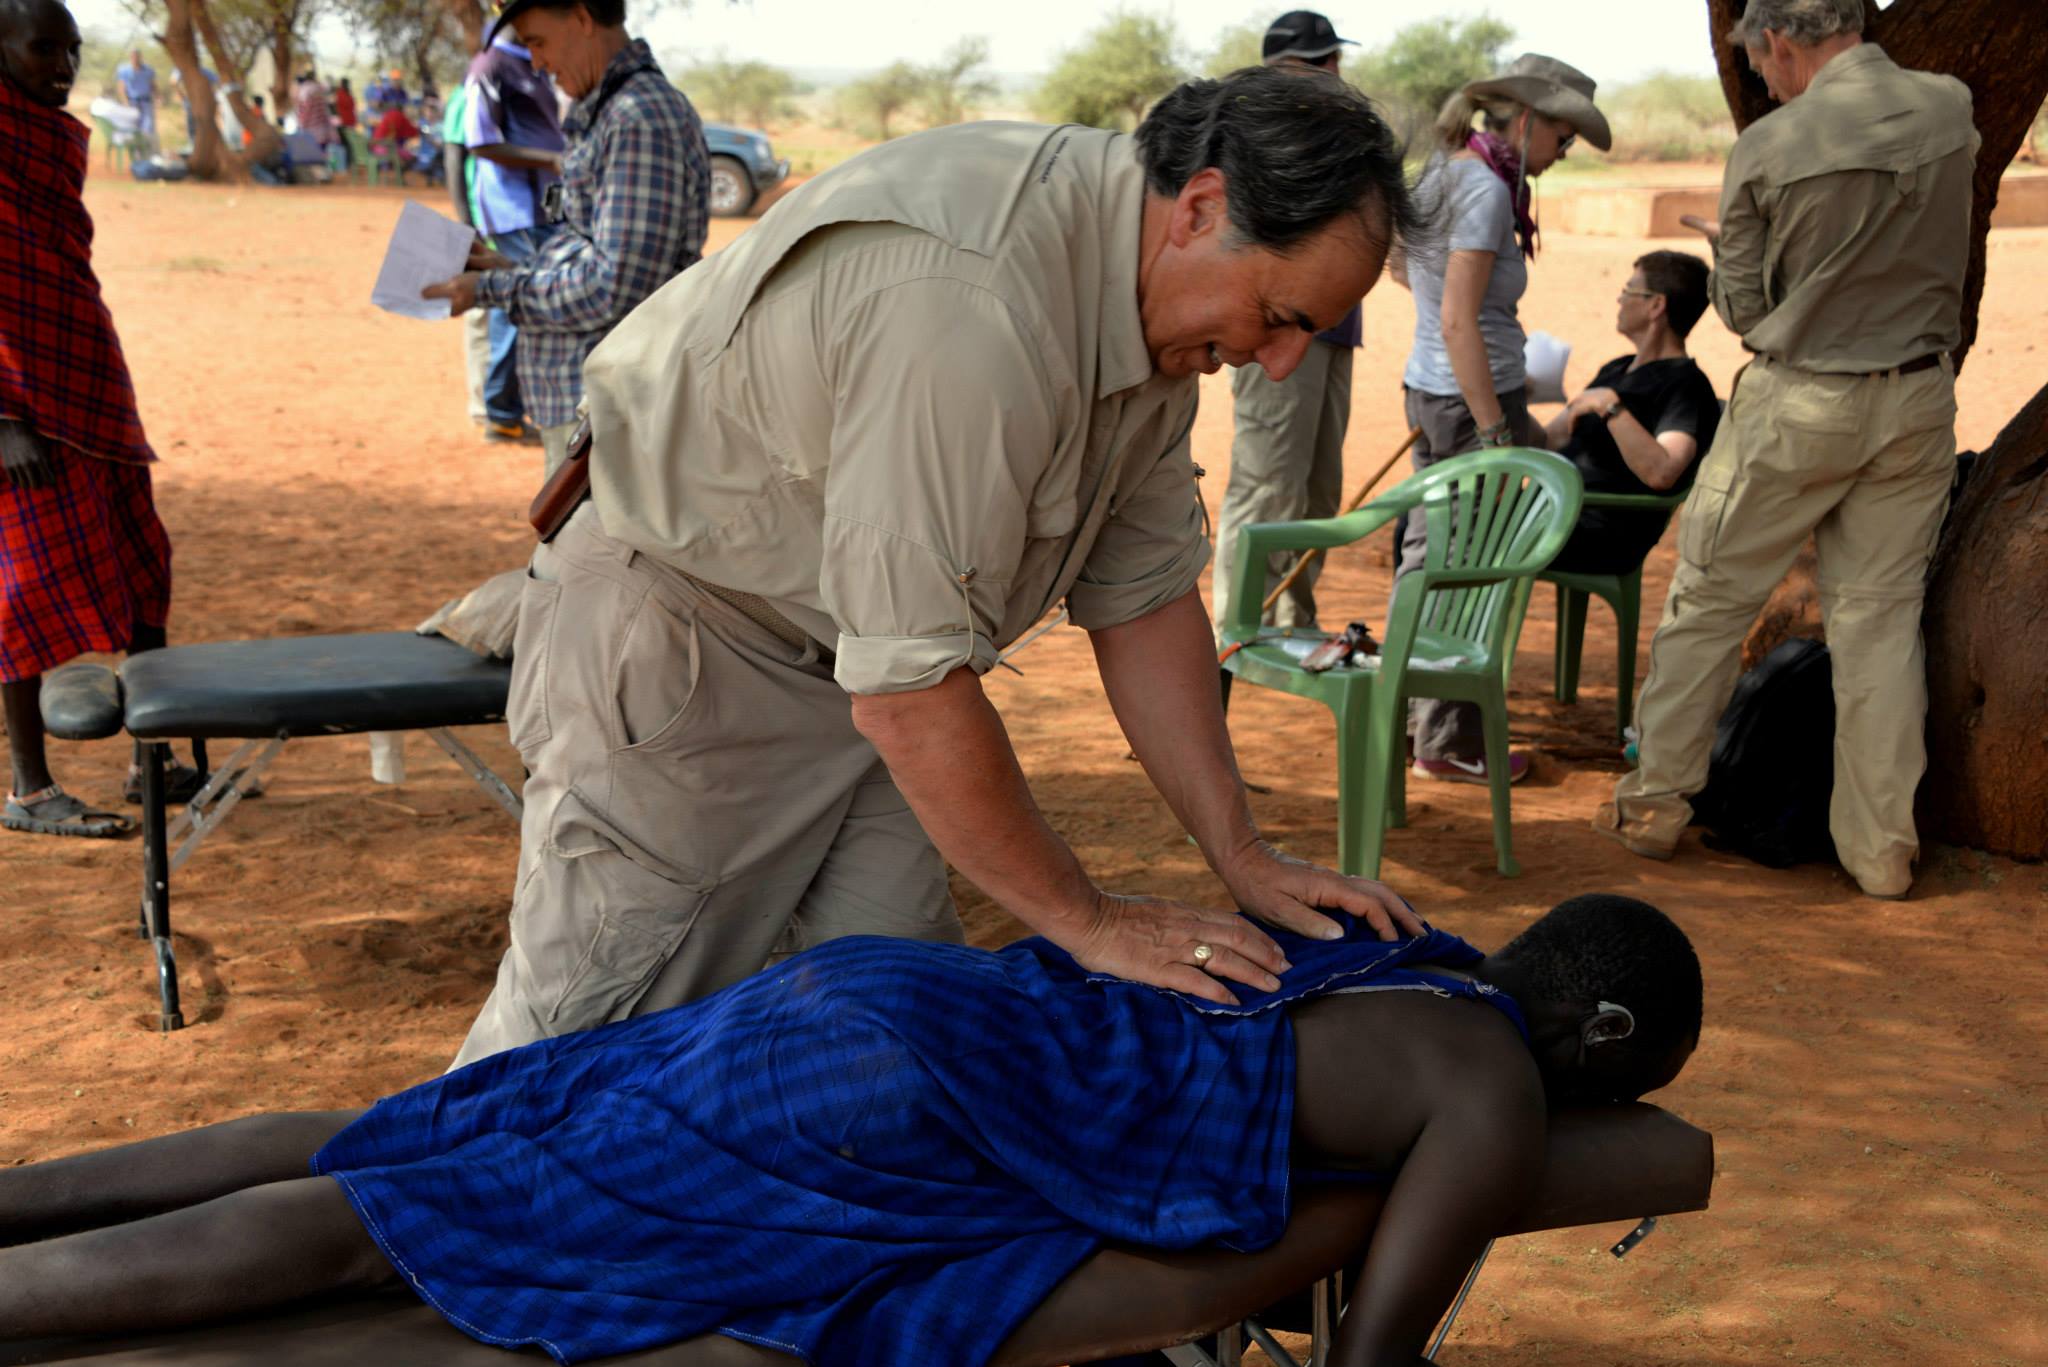 Jeff Kahrs, DC, adjusting the spine of a woman in Africa - 2014.